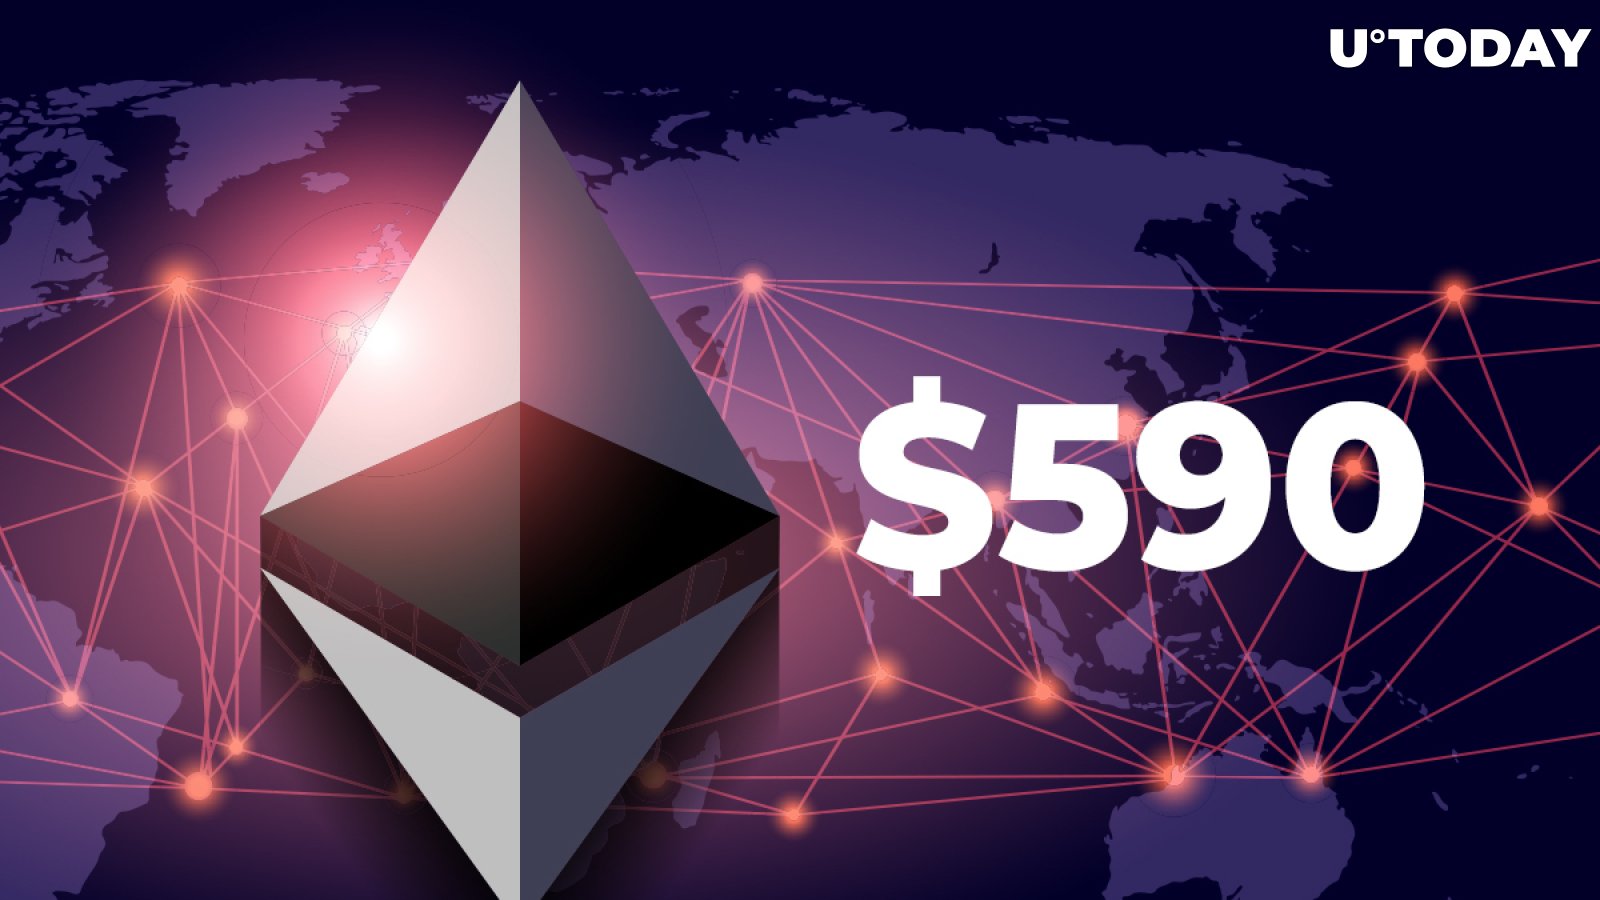 All Eyes on Ethereum (ETH) As It Hits $590